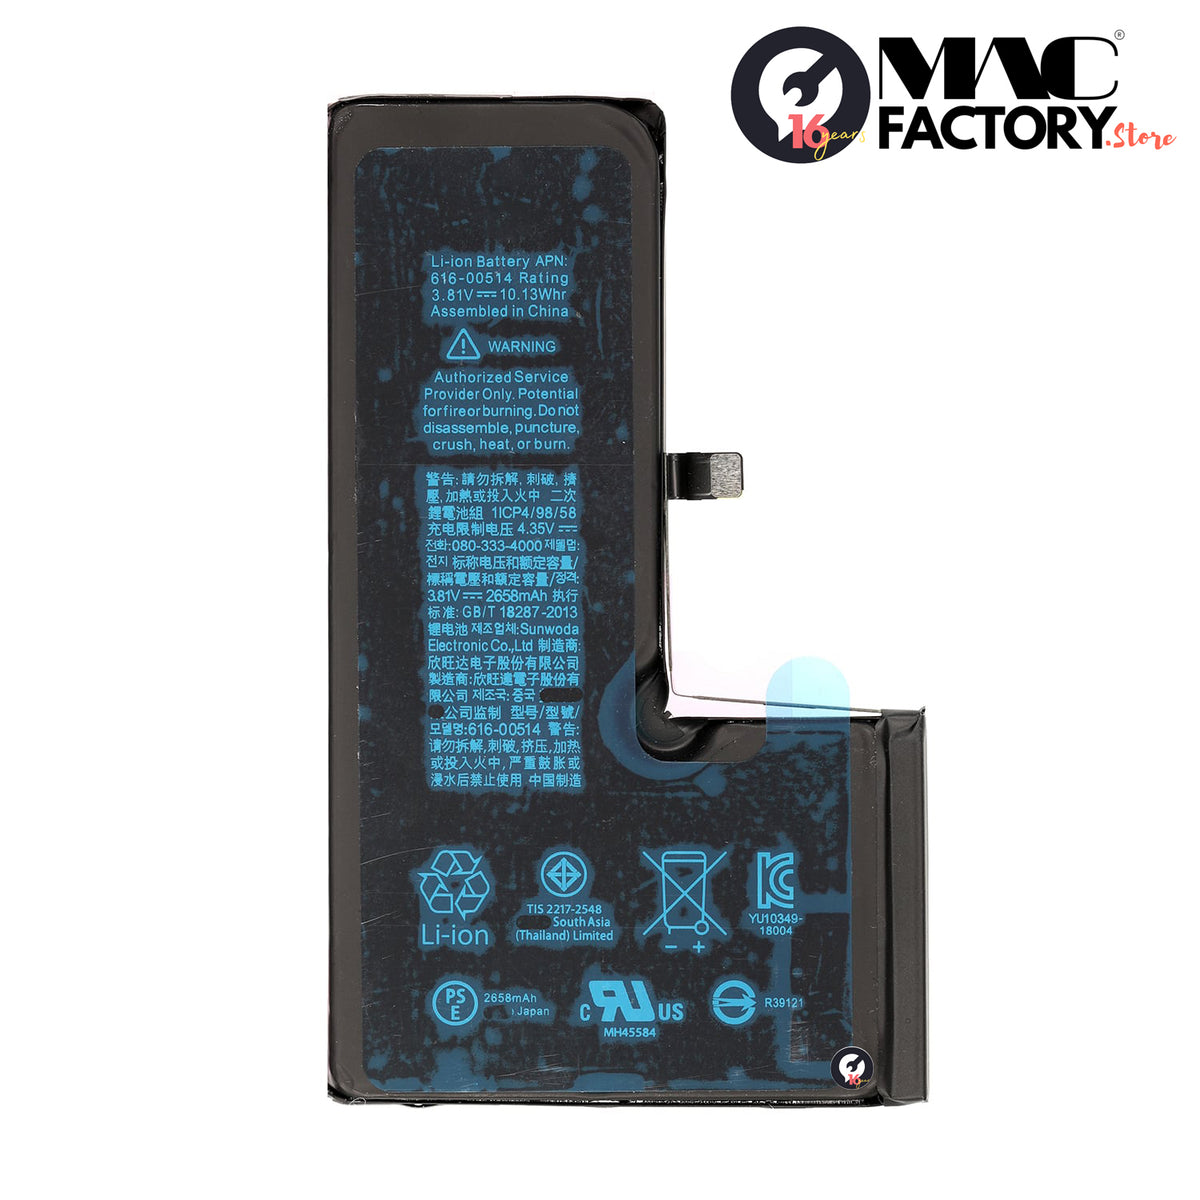 BATTERY 2658MAH FOR IPHONE XS